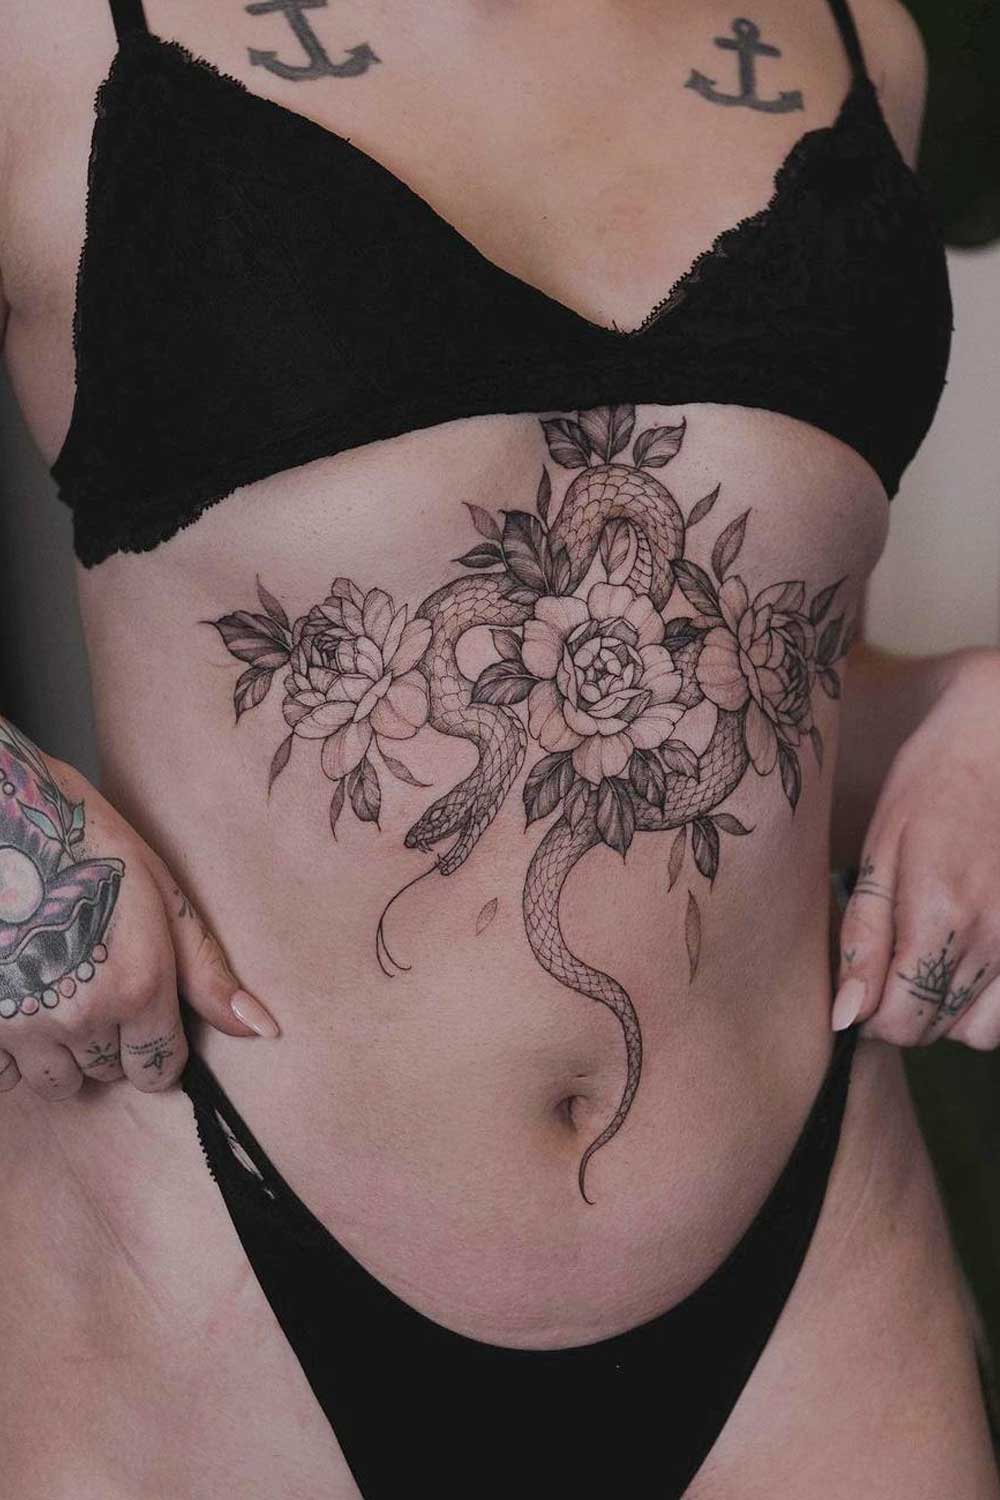 Big Sternum Tattoo of Snake with Flowers